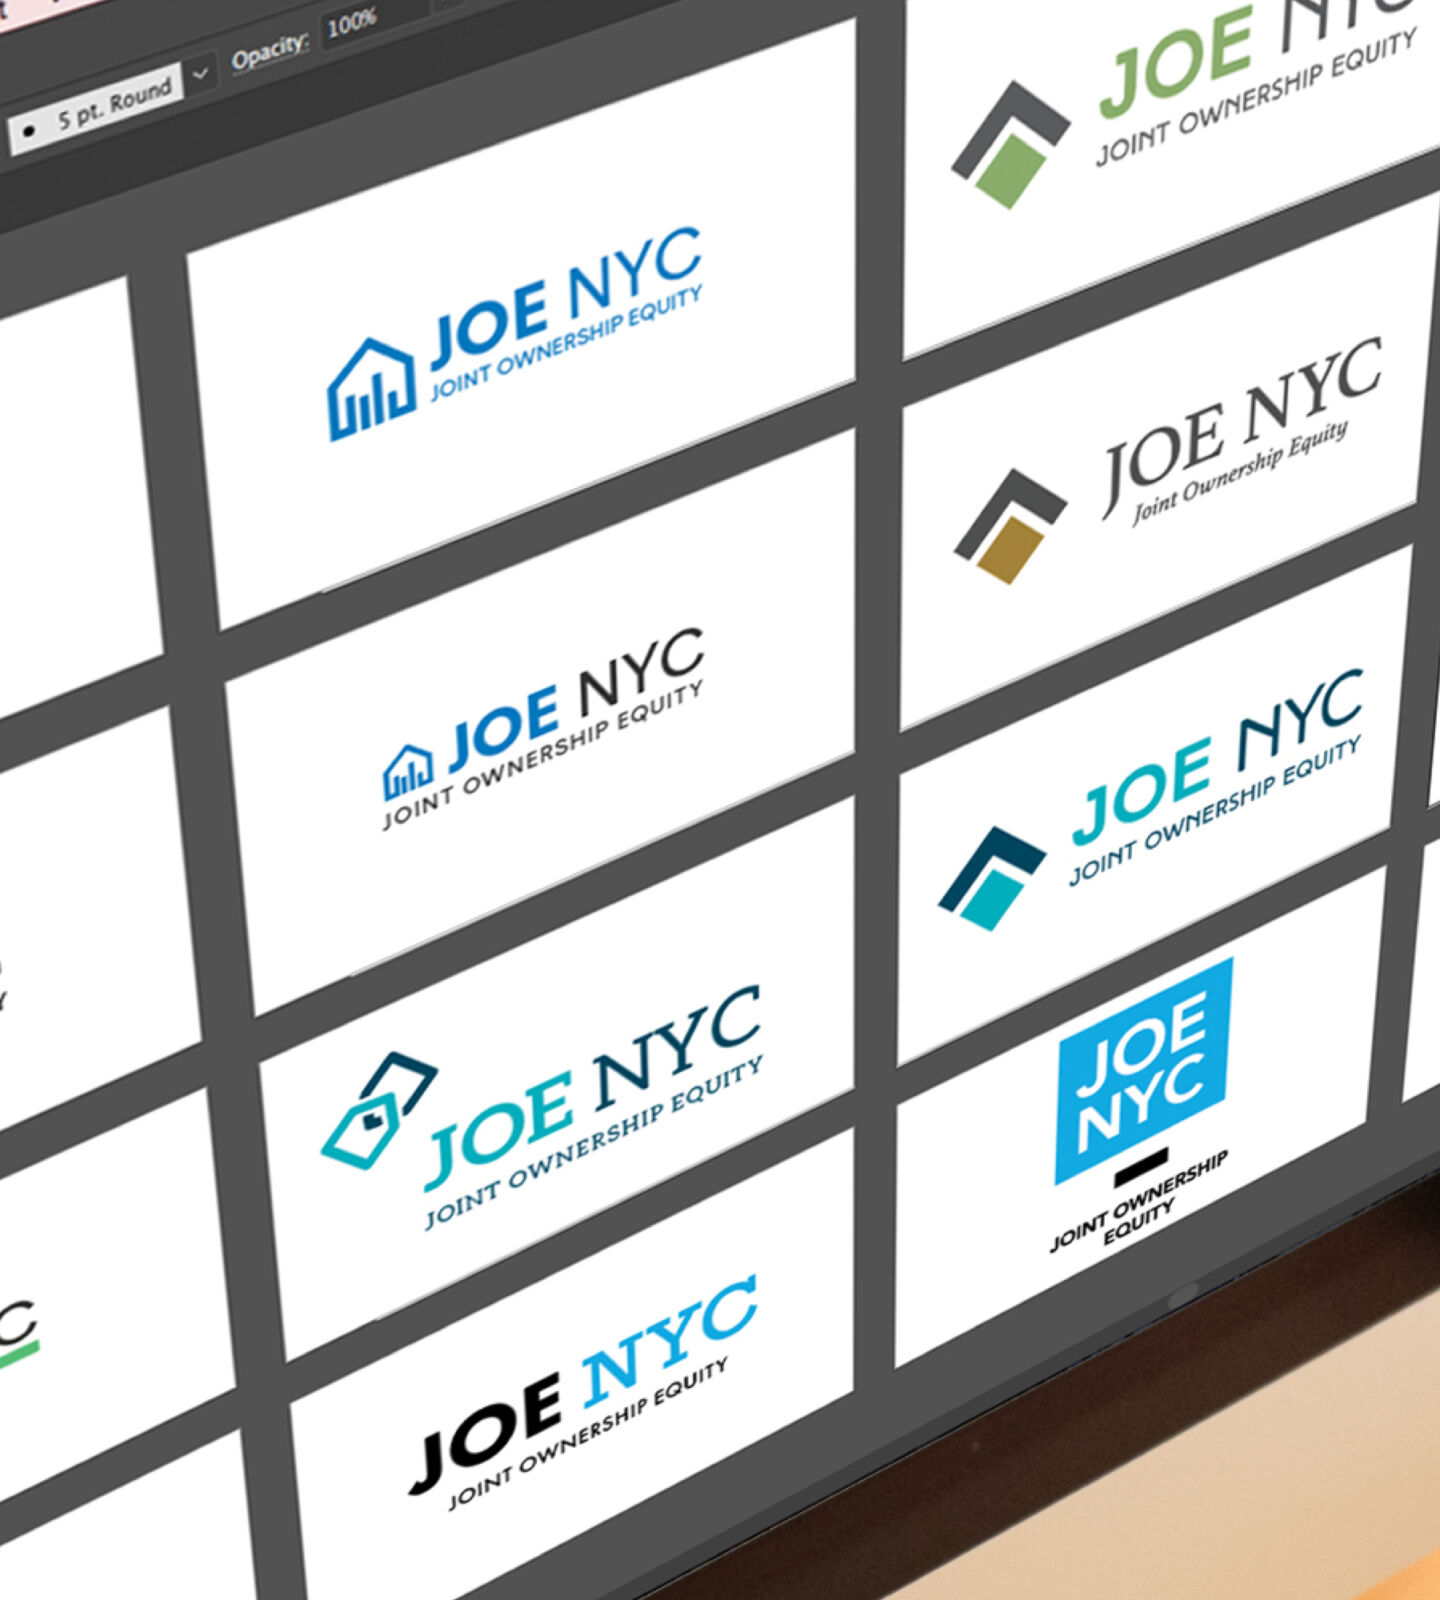 Collection of logo concepts as part of a nonprofit branding effort for JOE NYC.